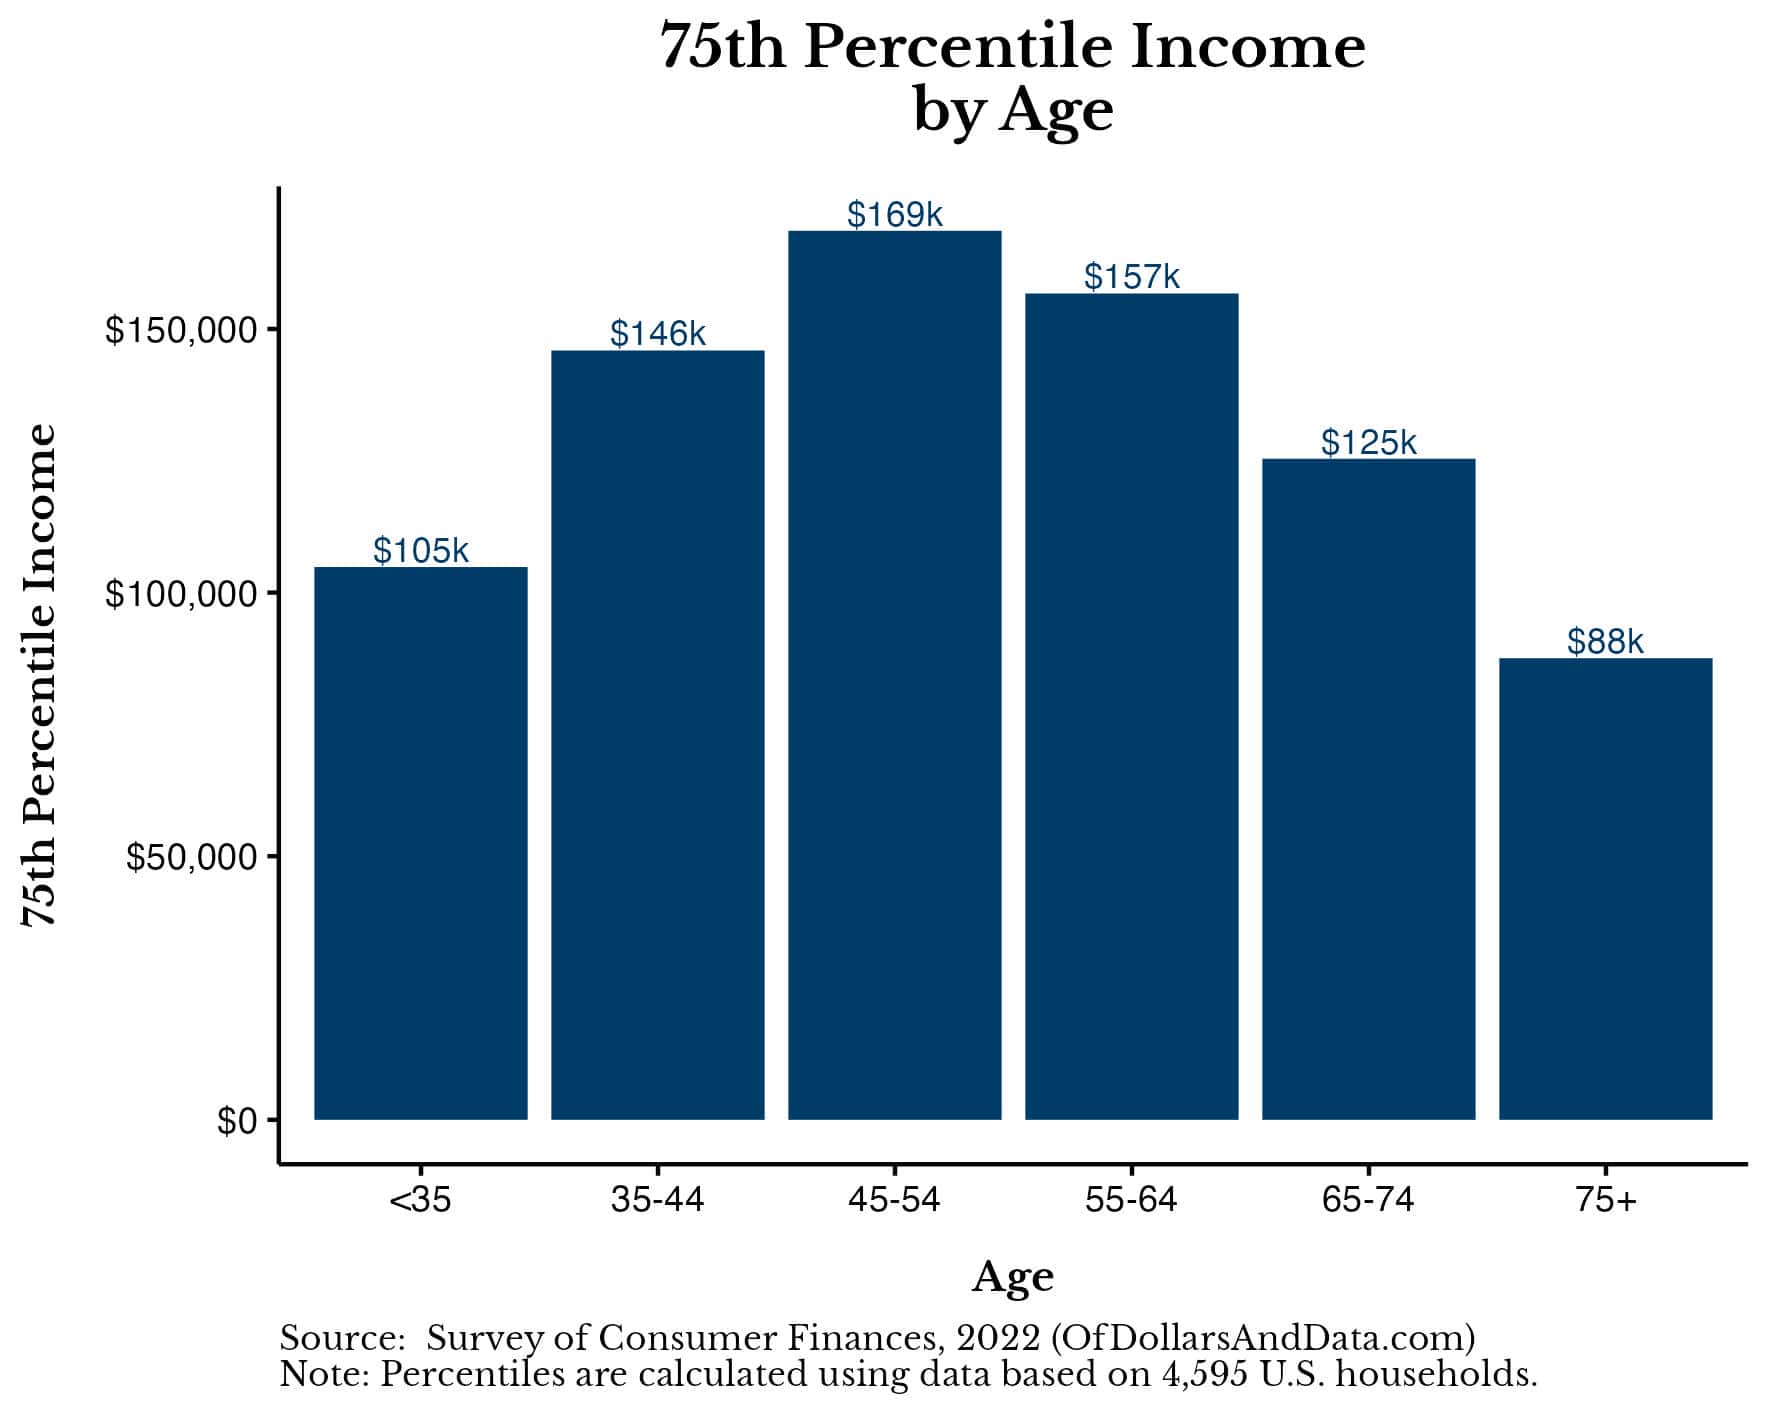 75th percentile household income by age in the U.S. from the 2022 Survey of Consumer Finances.